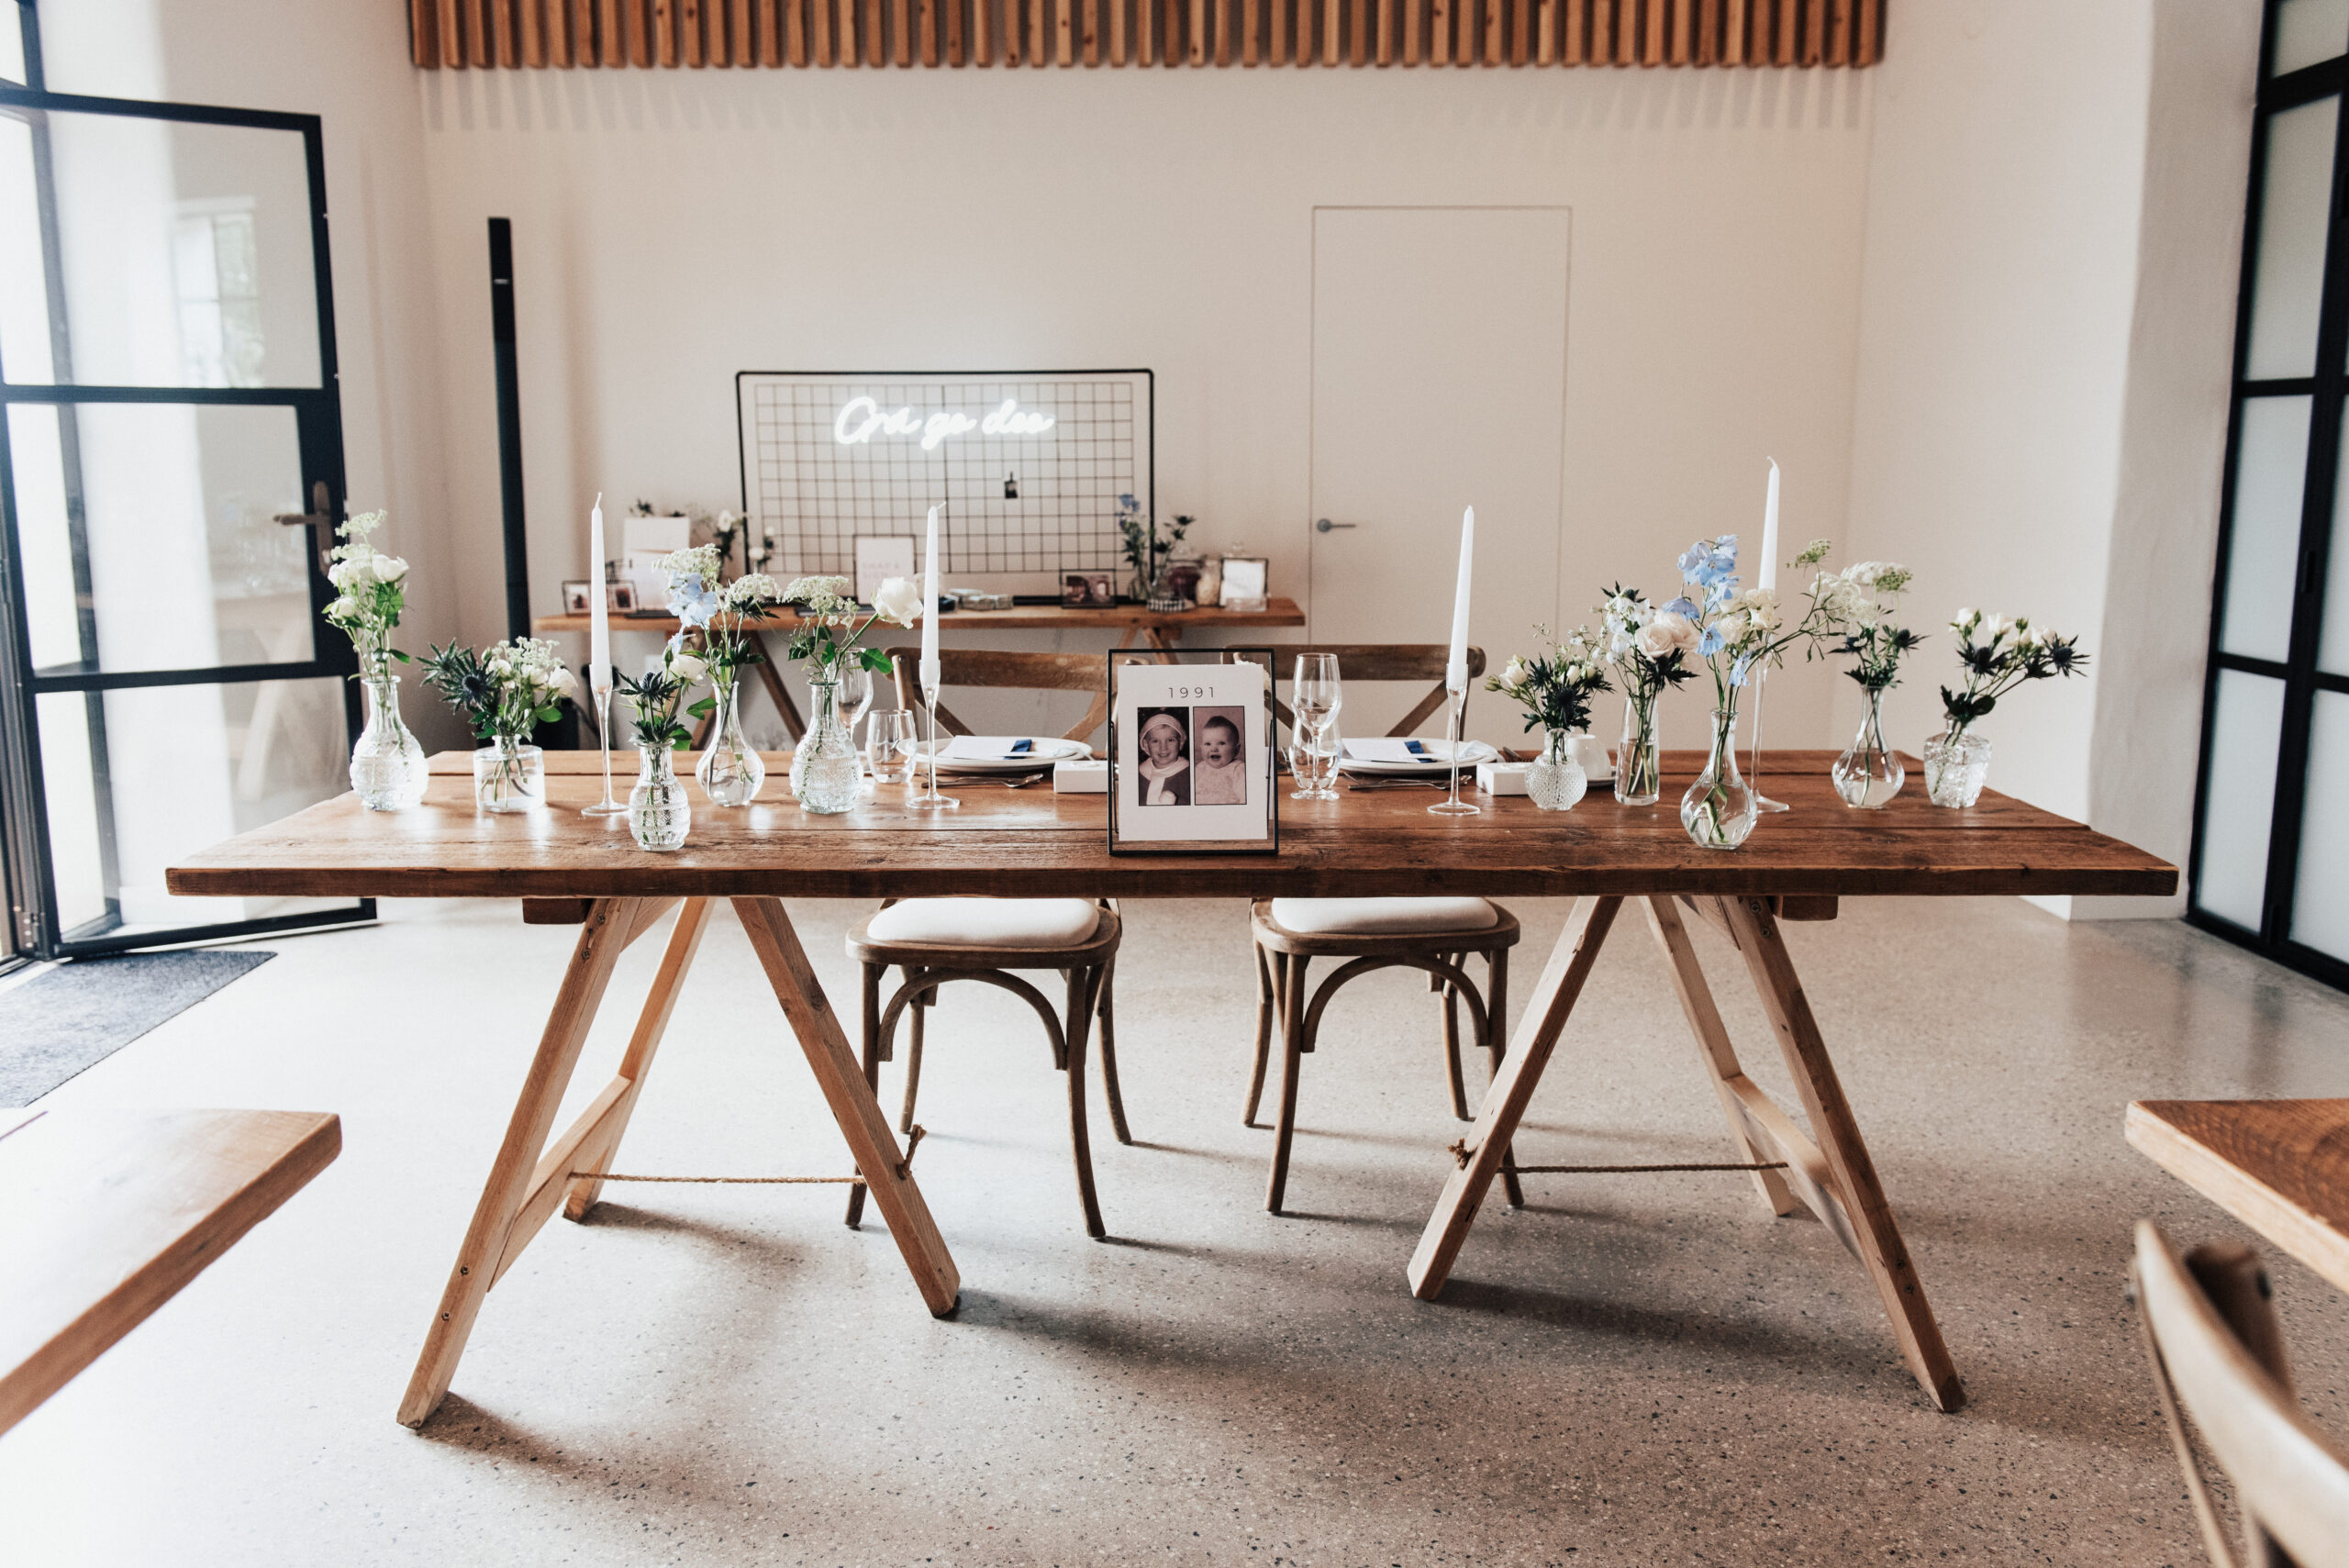 A black and white table name sign that reads "1991" with childhood photos of the bride and groom is displayed in a black metal frame on a wooden table. White candles and blue flowers are placed next to the menu. There is a neon sign in the background with a black frame. This setting is at a wedding at Brickhouse Vineyard in Devon.